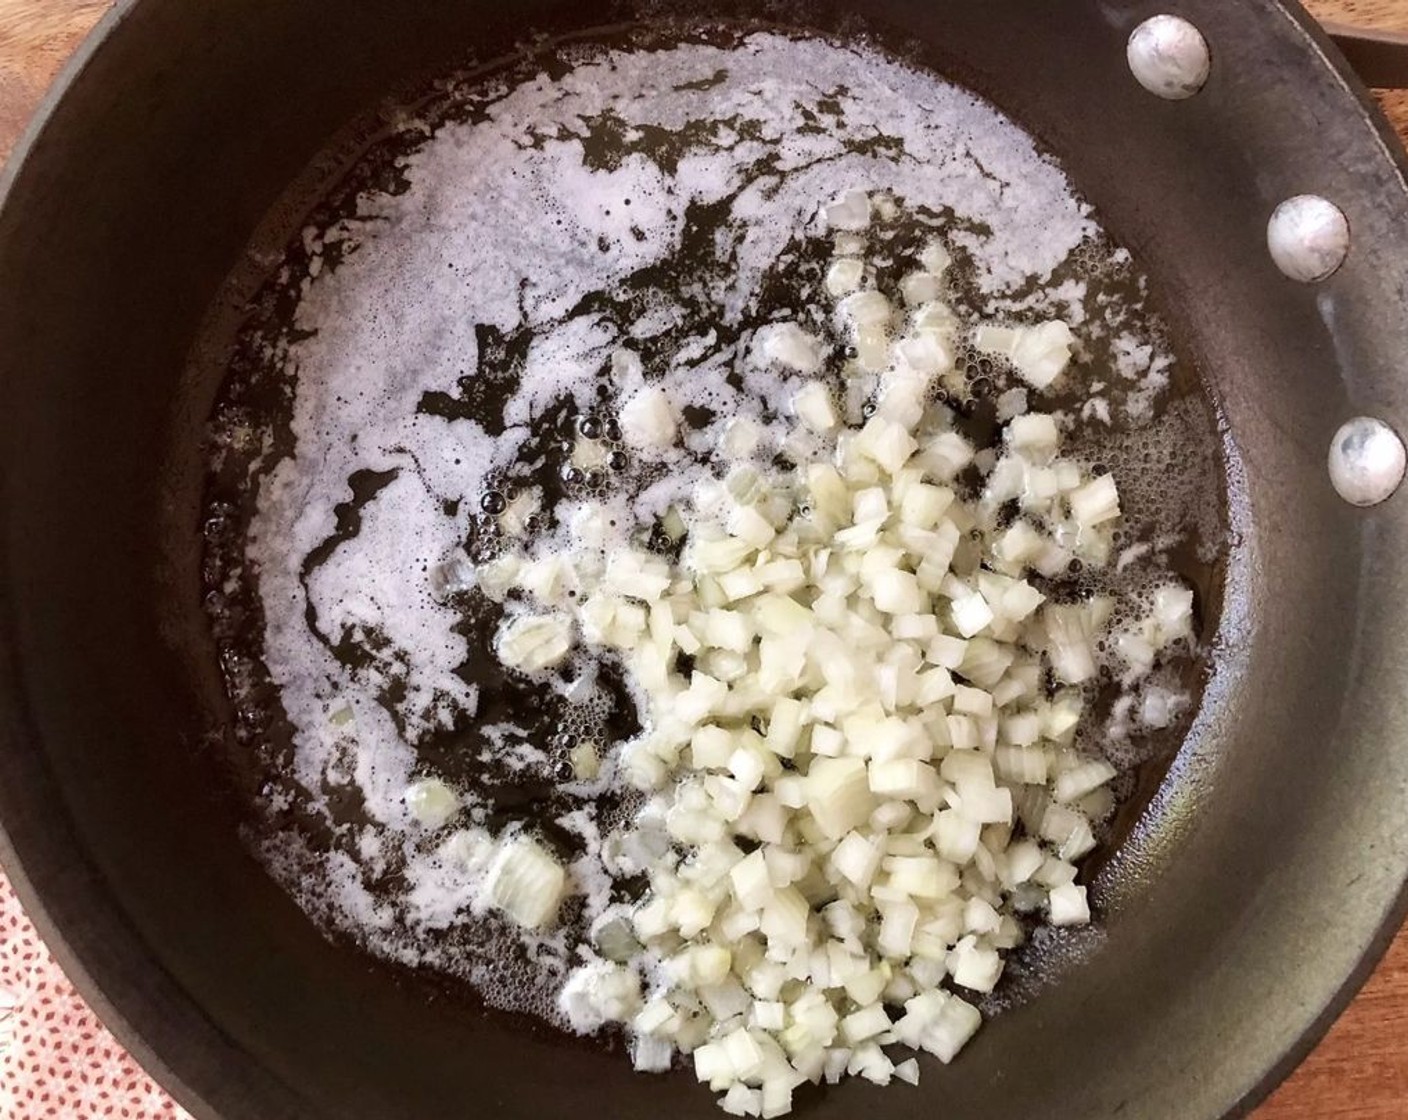 step 4 To make the white sauce, in a medium saucepan melt Unsalted Butter (1/4 cup) and cook the Onion (1) over medium heat for about 5 minutes or until softened.